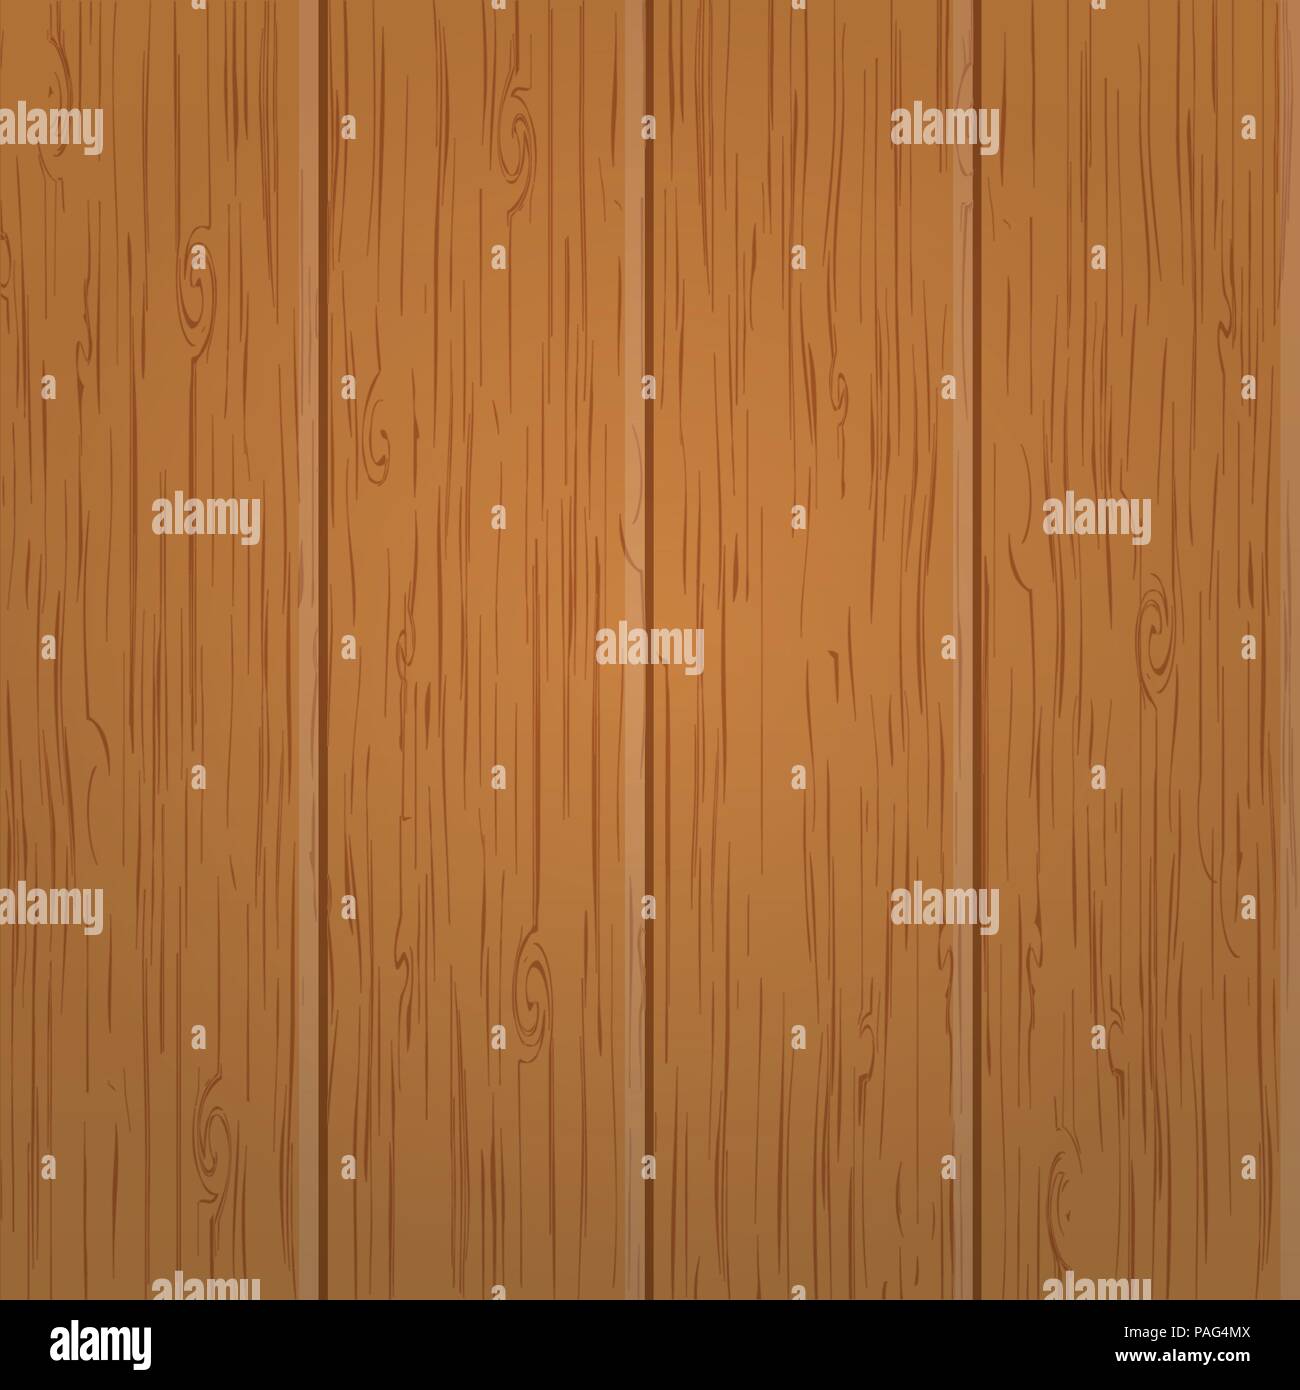 Wood texture background. Vector illustration. Grunge retro vintage wooden texture. Old wood paneling, laminate or parquet. Stock Vector